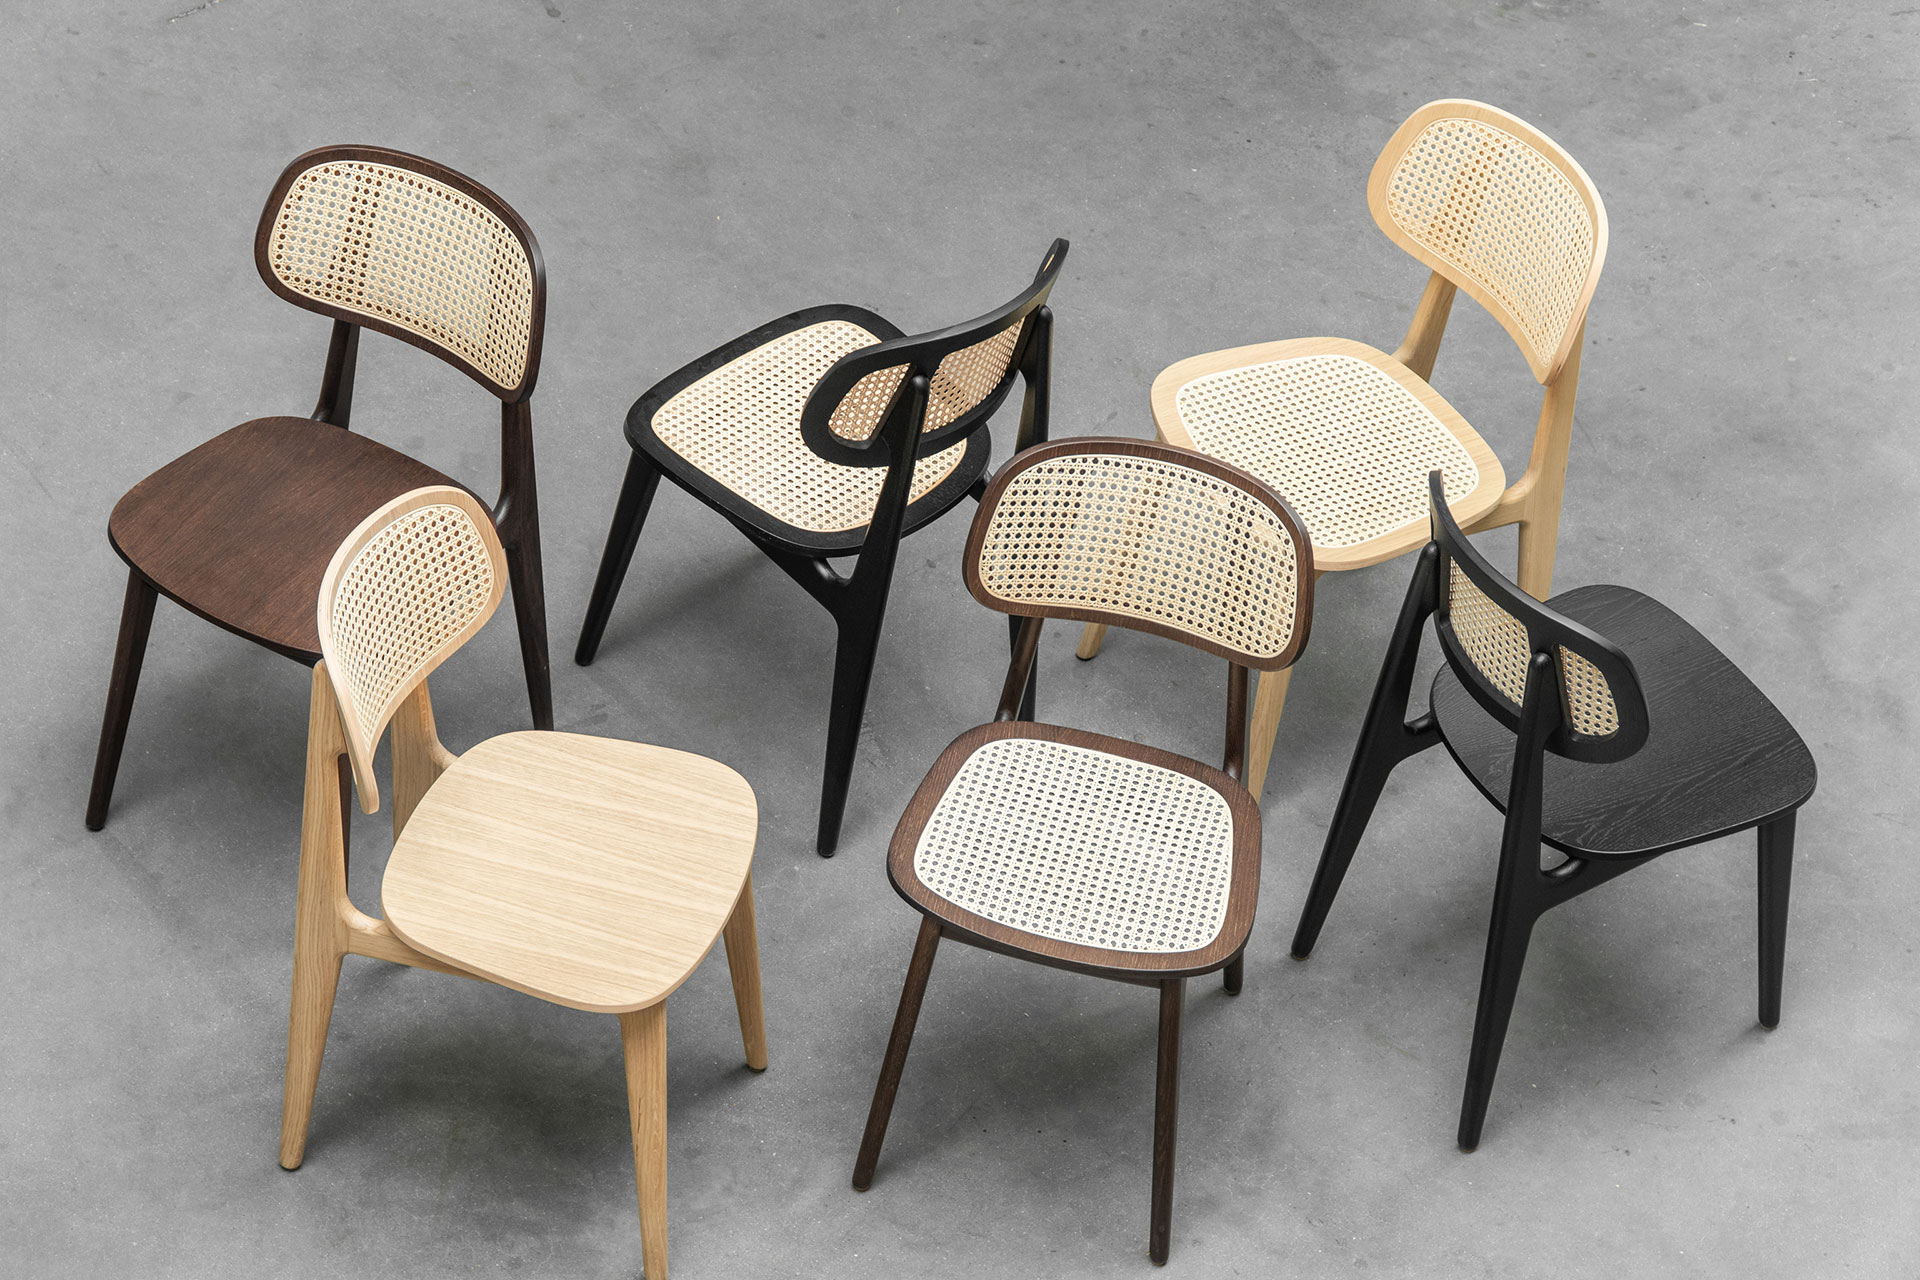 TITUS Dining Chair (Plywood Seat)